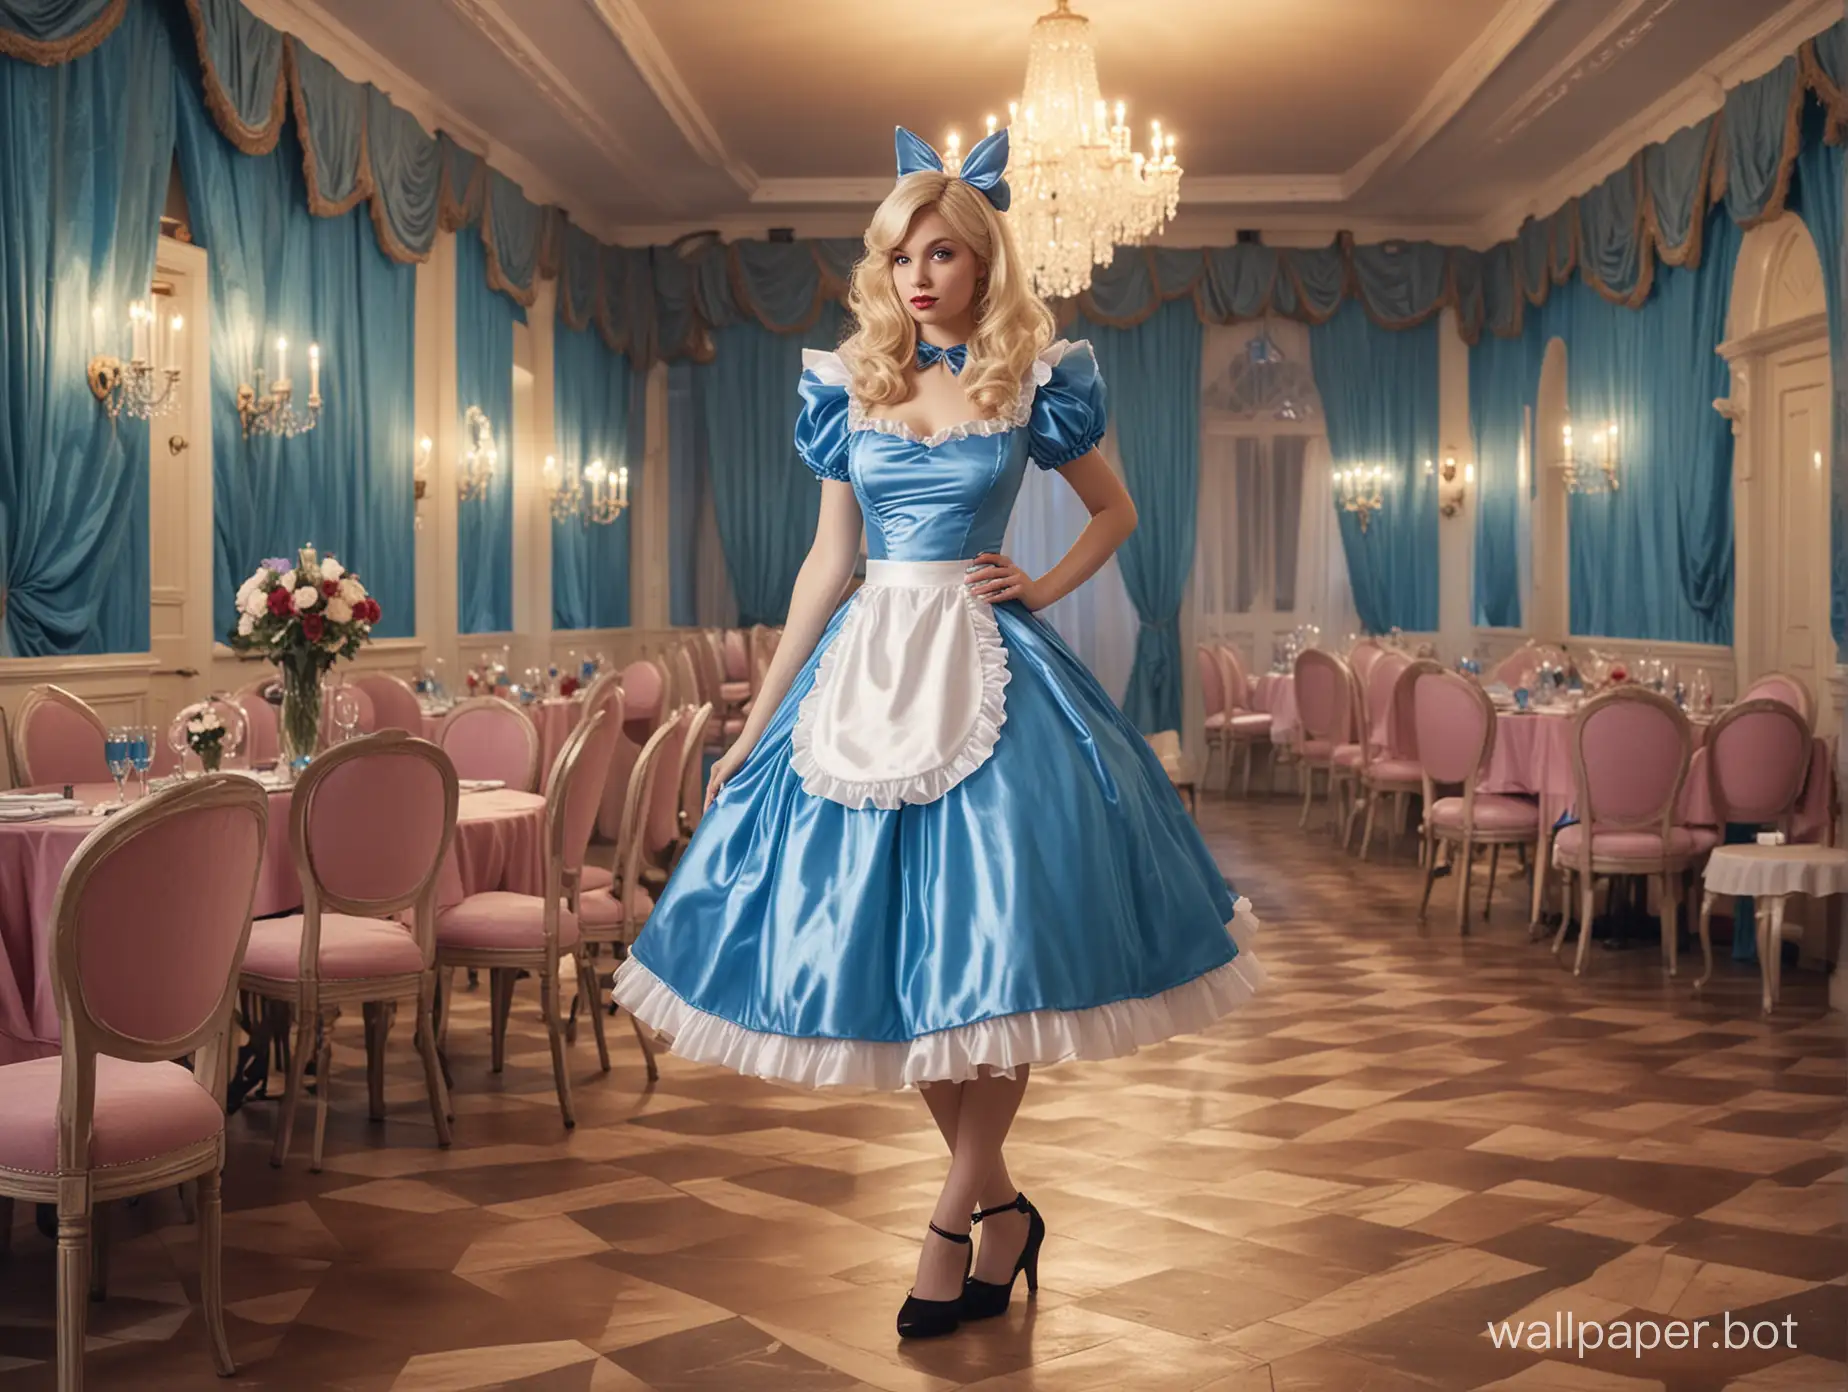 A young adult Caucasian woman cosplaying as Disney’s Alice in Wonderland if she were at an 80s-themed prom event. The character’s iconic blue satin dress is in the style of a 1980’s prom dress, with poofy shoulders, a large bow, wide poofy skirt, ruffled apron, stockings, and high heels. The woman wears a styled blonde wig. The background is a whimsical banquet hall., photo, cinematic